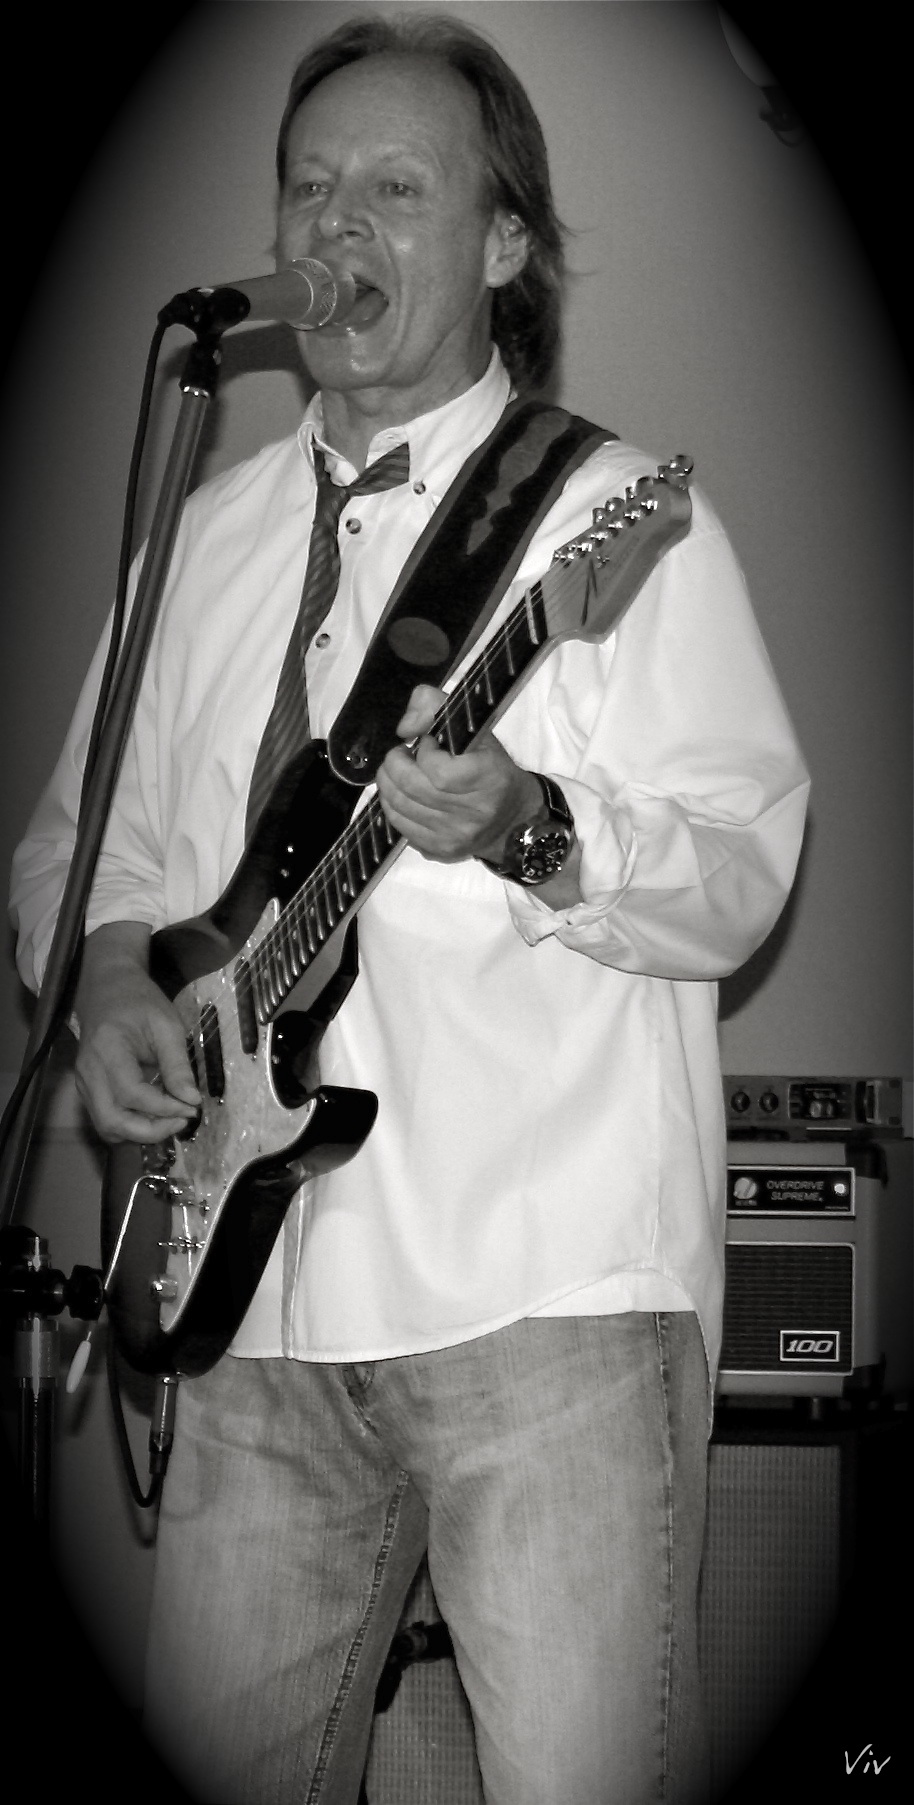 Steve with his Tom Anderson Hollow Classic Guitar. Steve is an Endorsee for Fuchs Amplifiers U.S.A